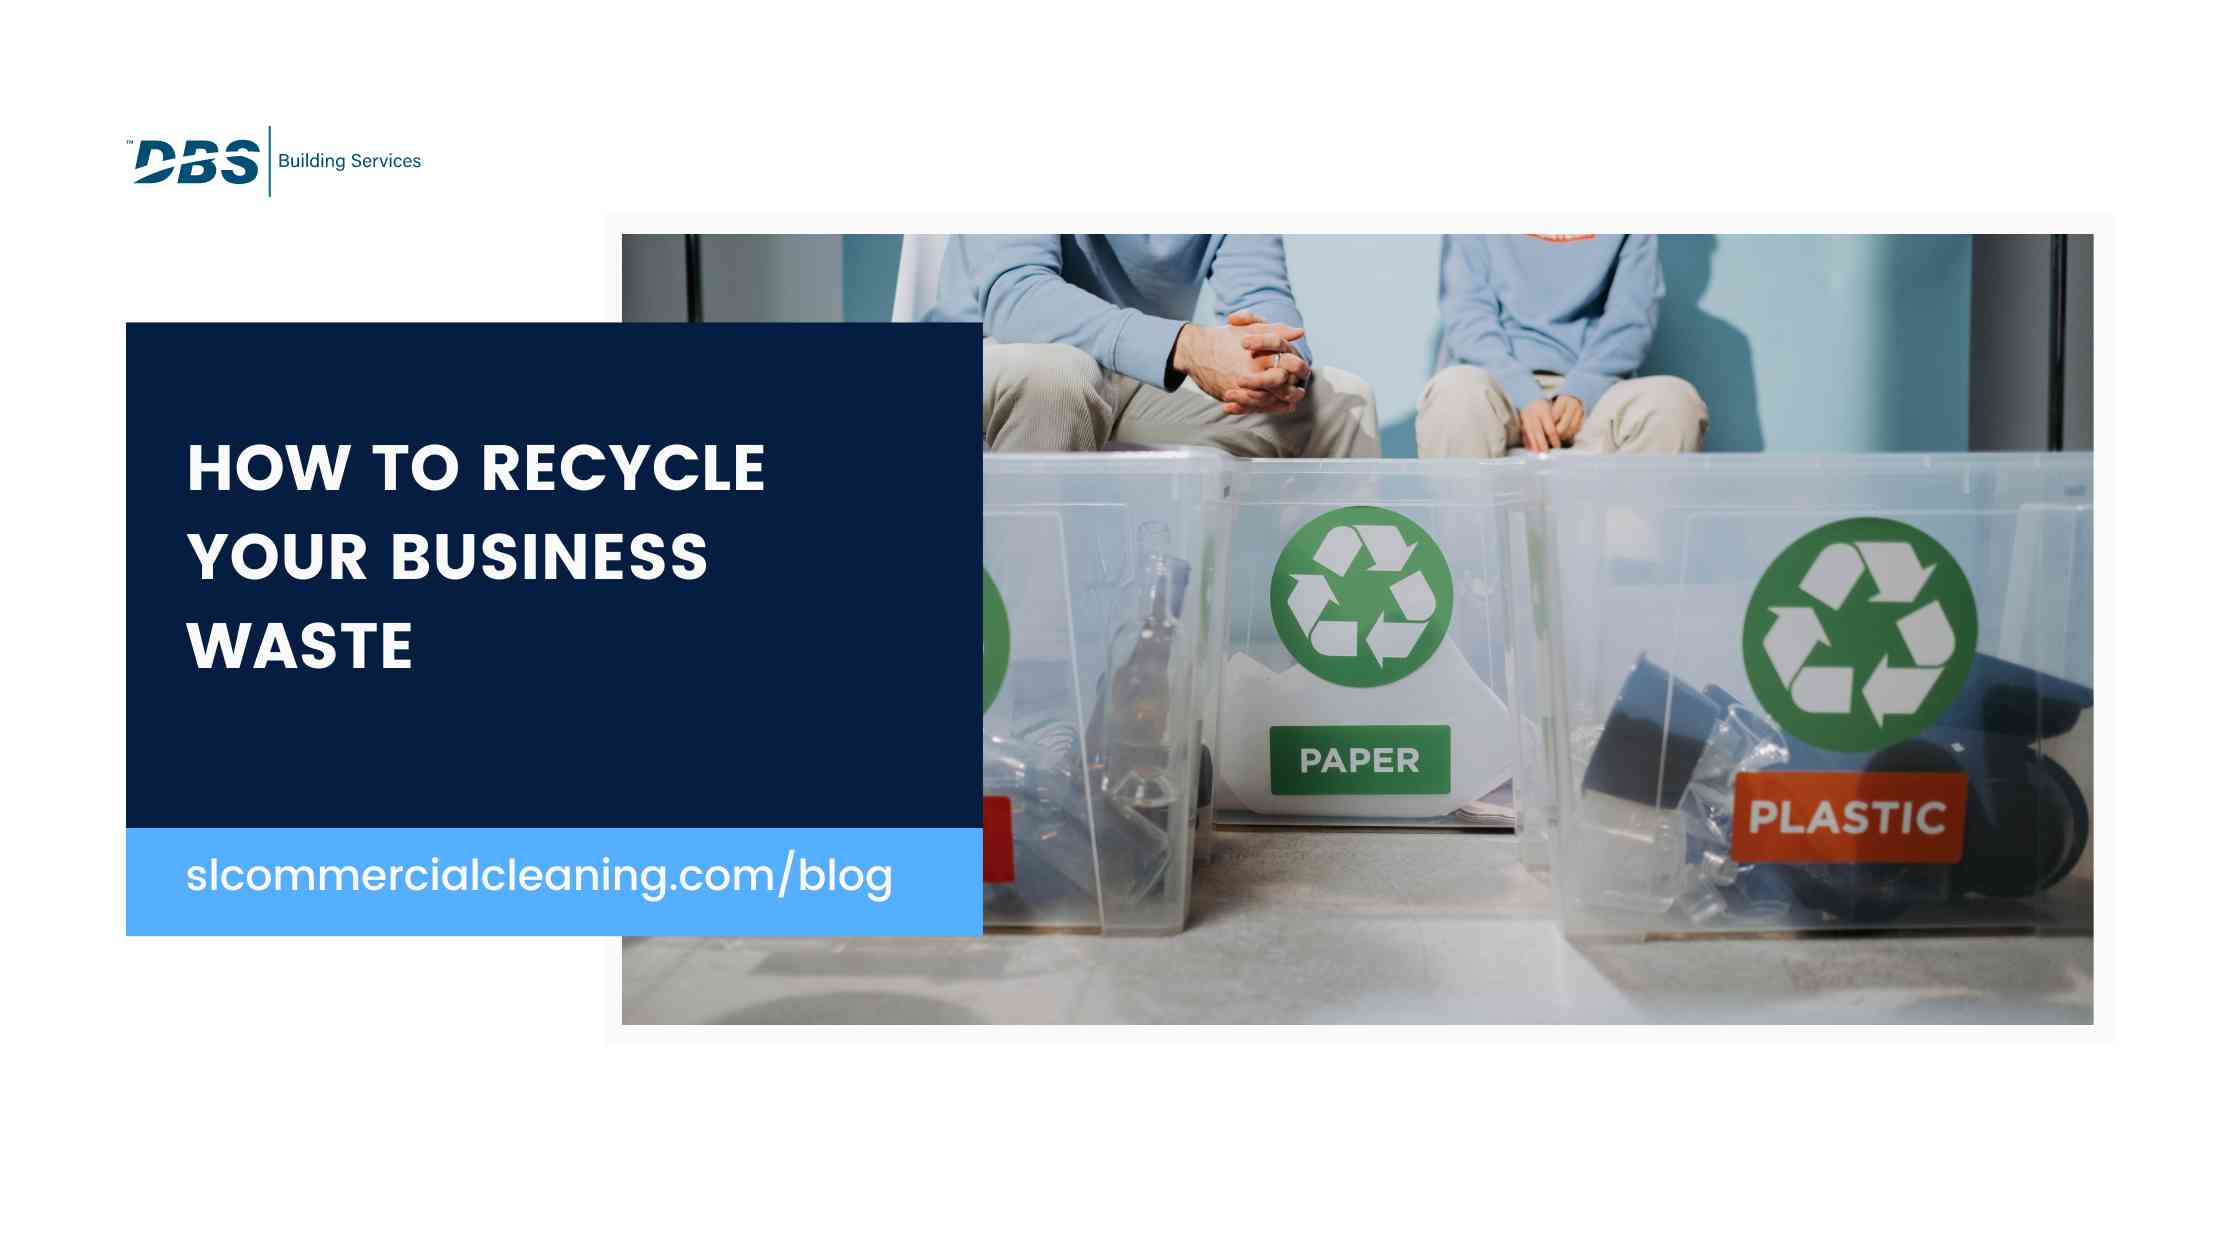 How to Recycle Your Business Waste